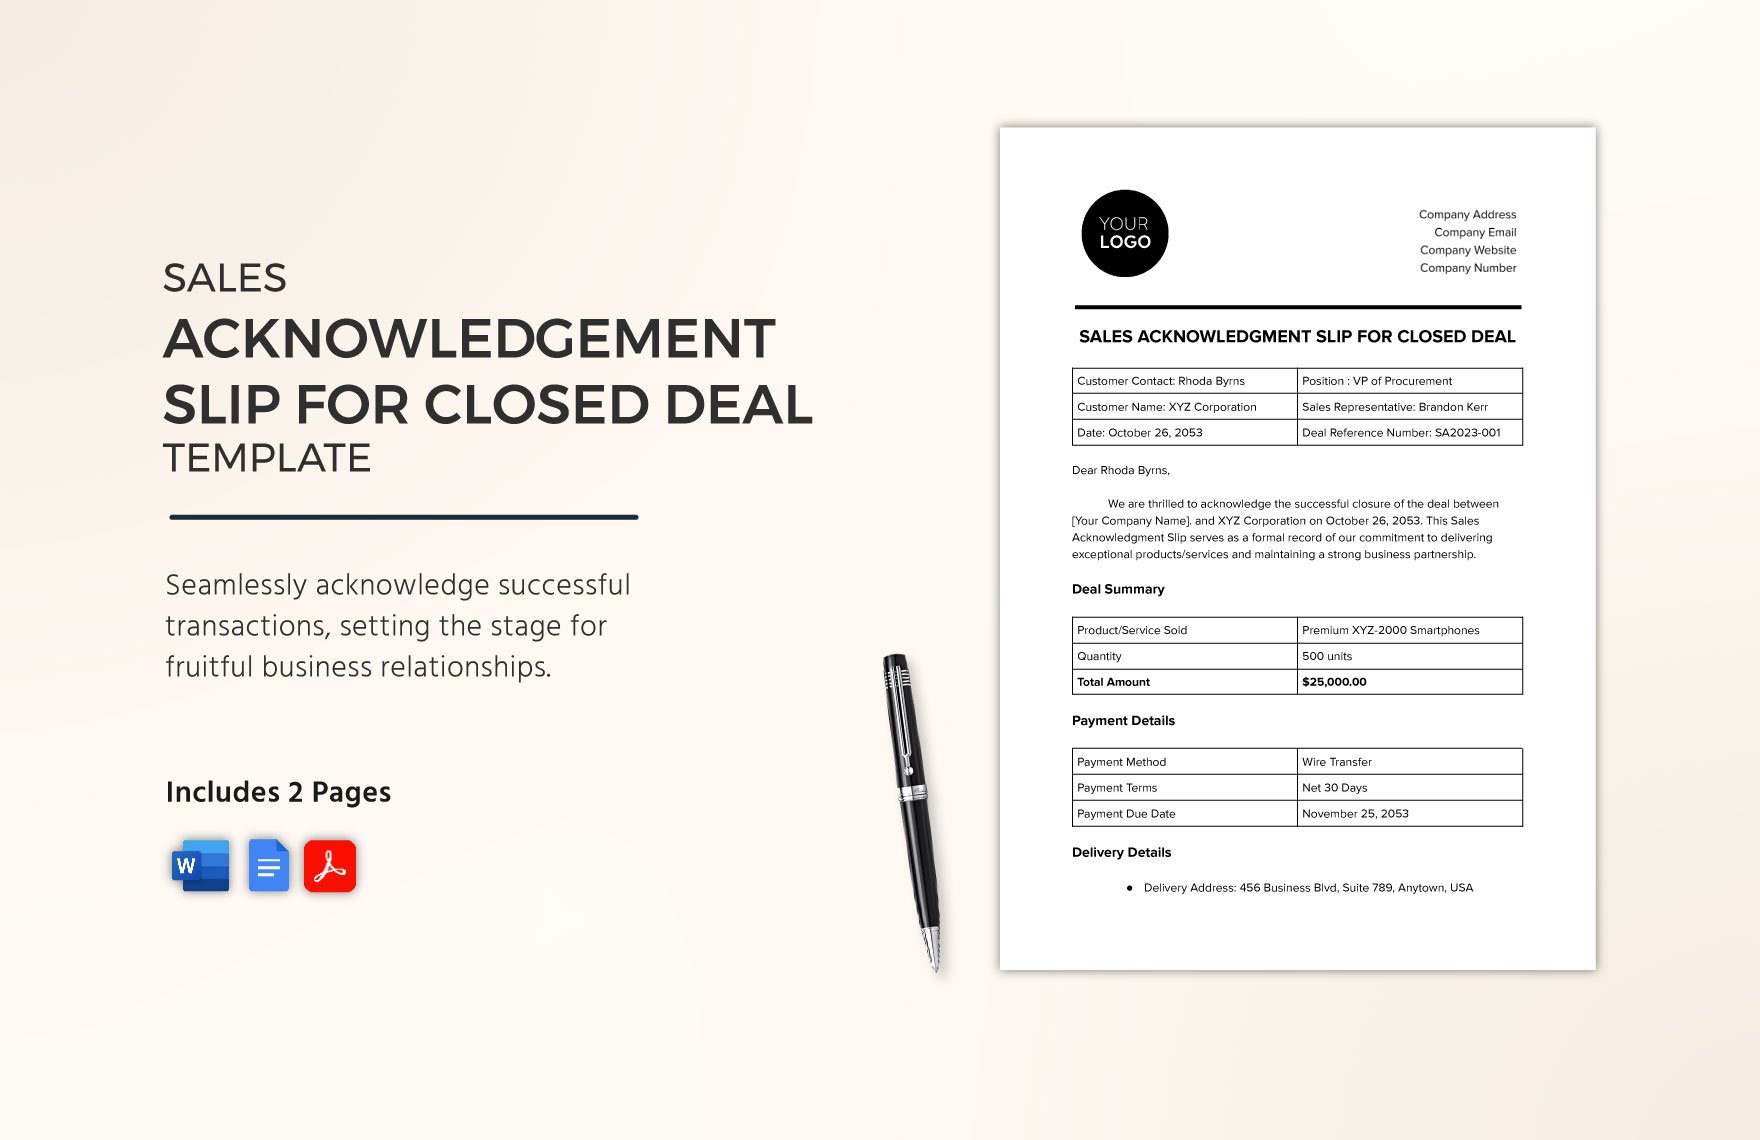 Sales Acknowledgment Slip for Closed Deal Template in Word, Google Docs, PDF